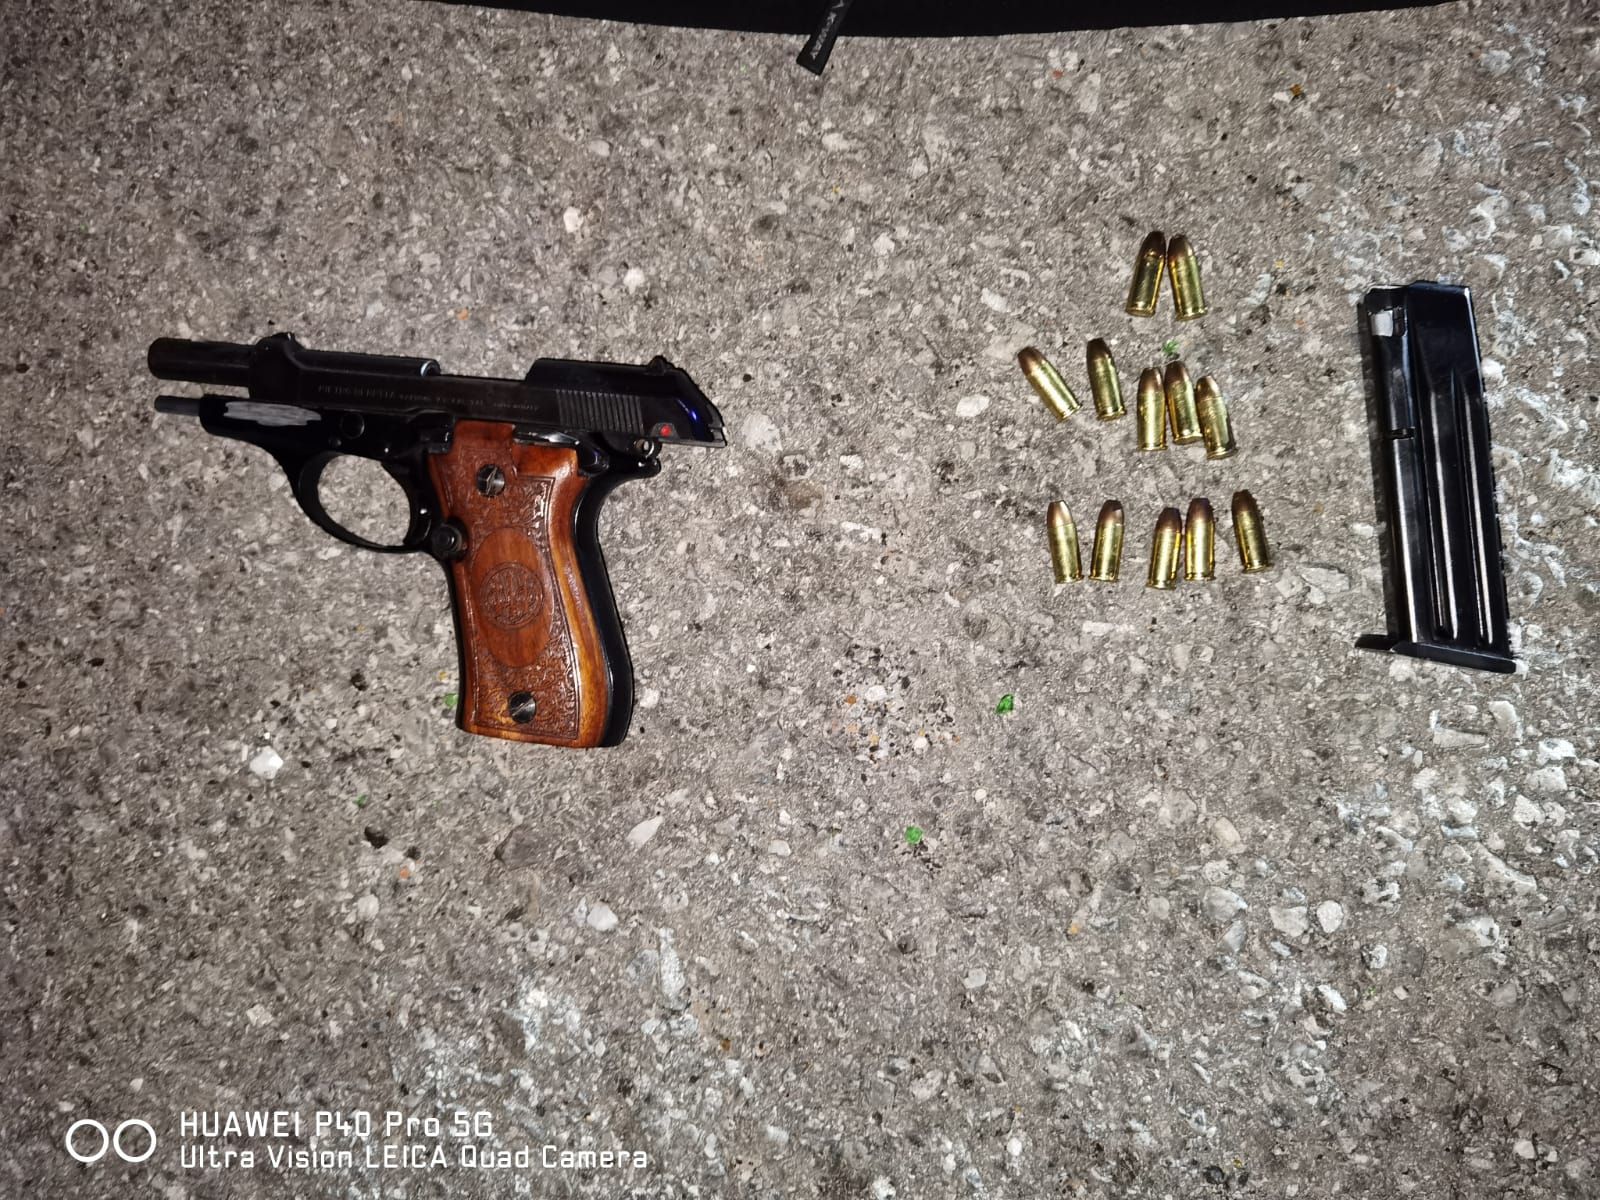 Flying squad arrest male for possession of illegal firearm and bribery